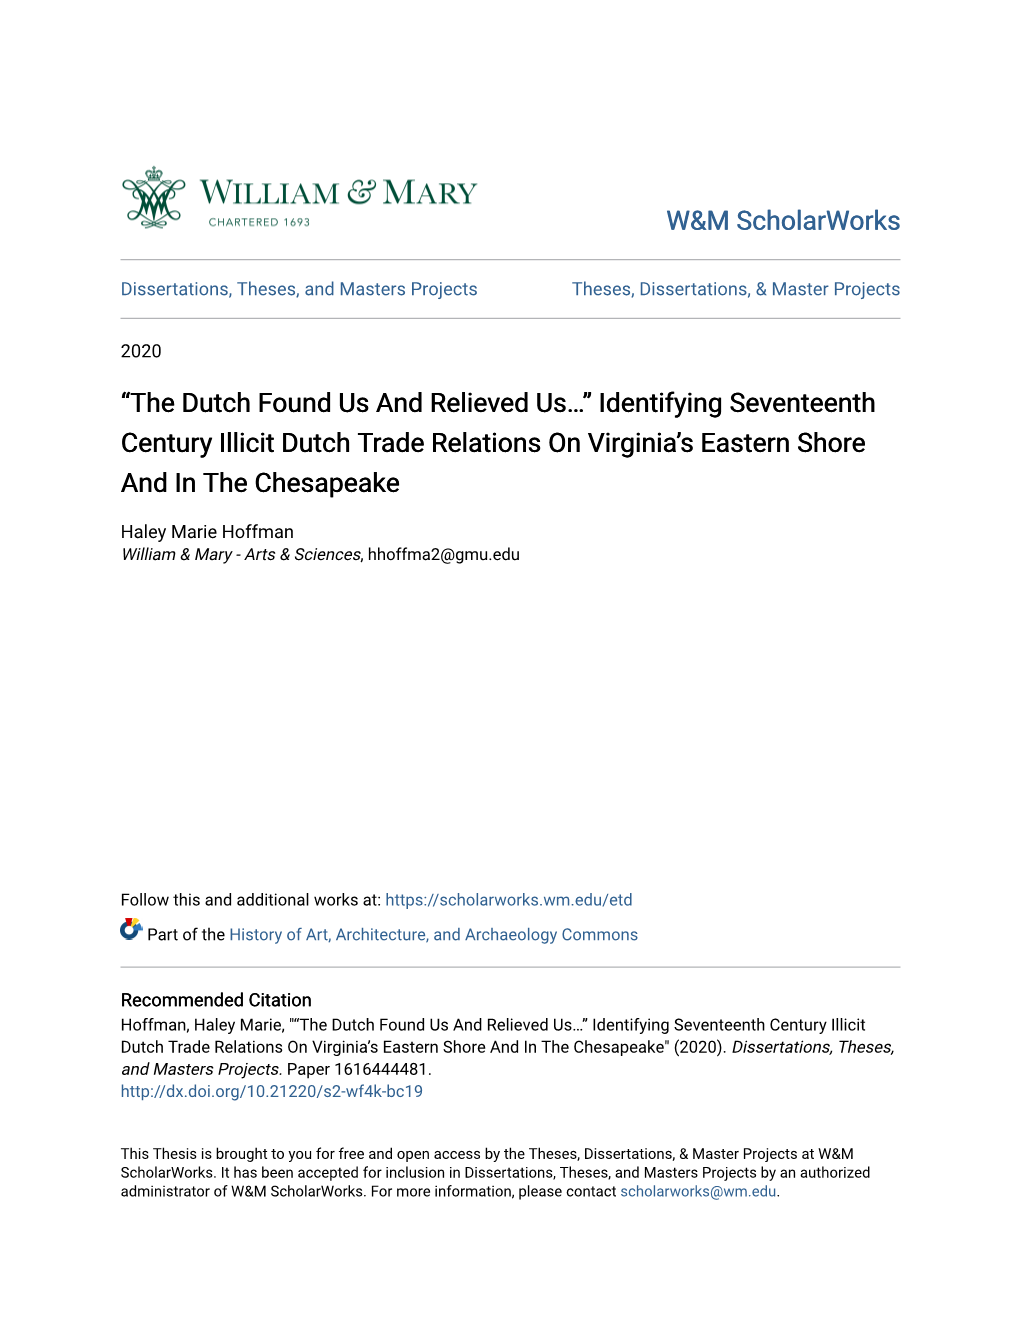 Identifying Seventeenth Century Illicit Dutch Trade Relations on Virginia’S Eastern Shore and in the Chesapeake